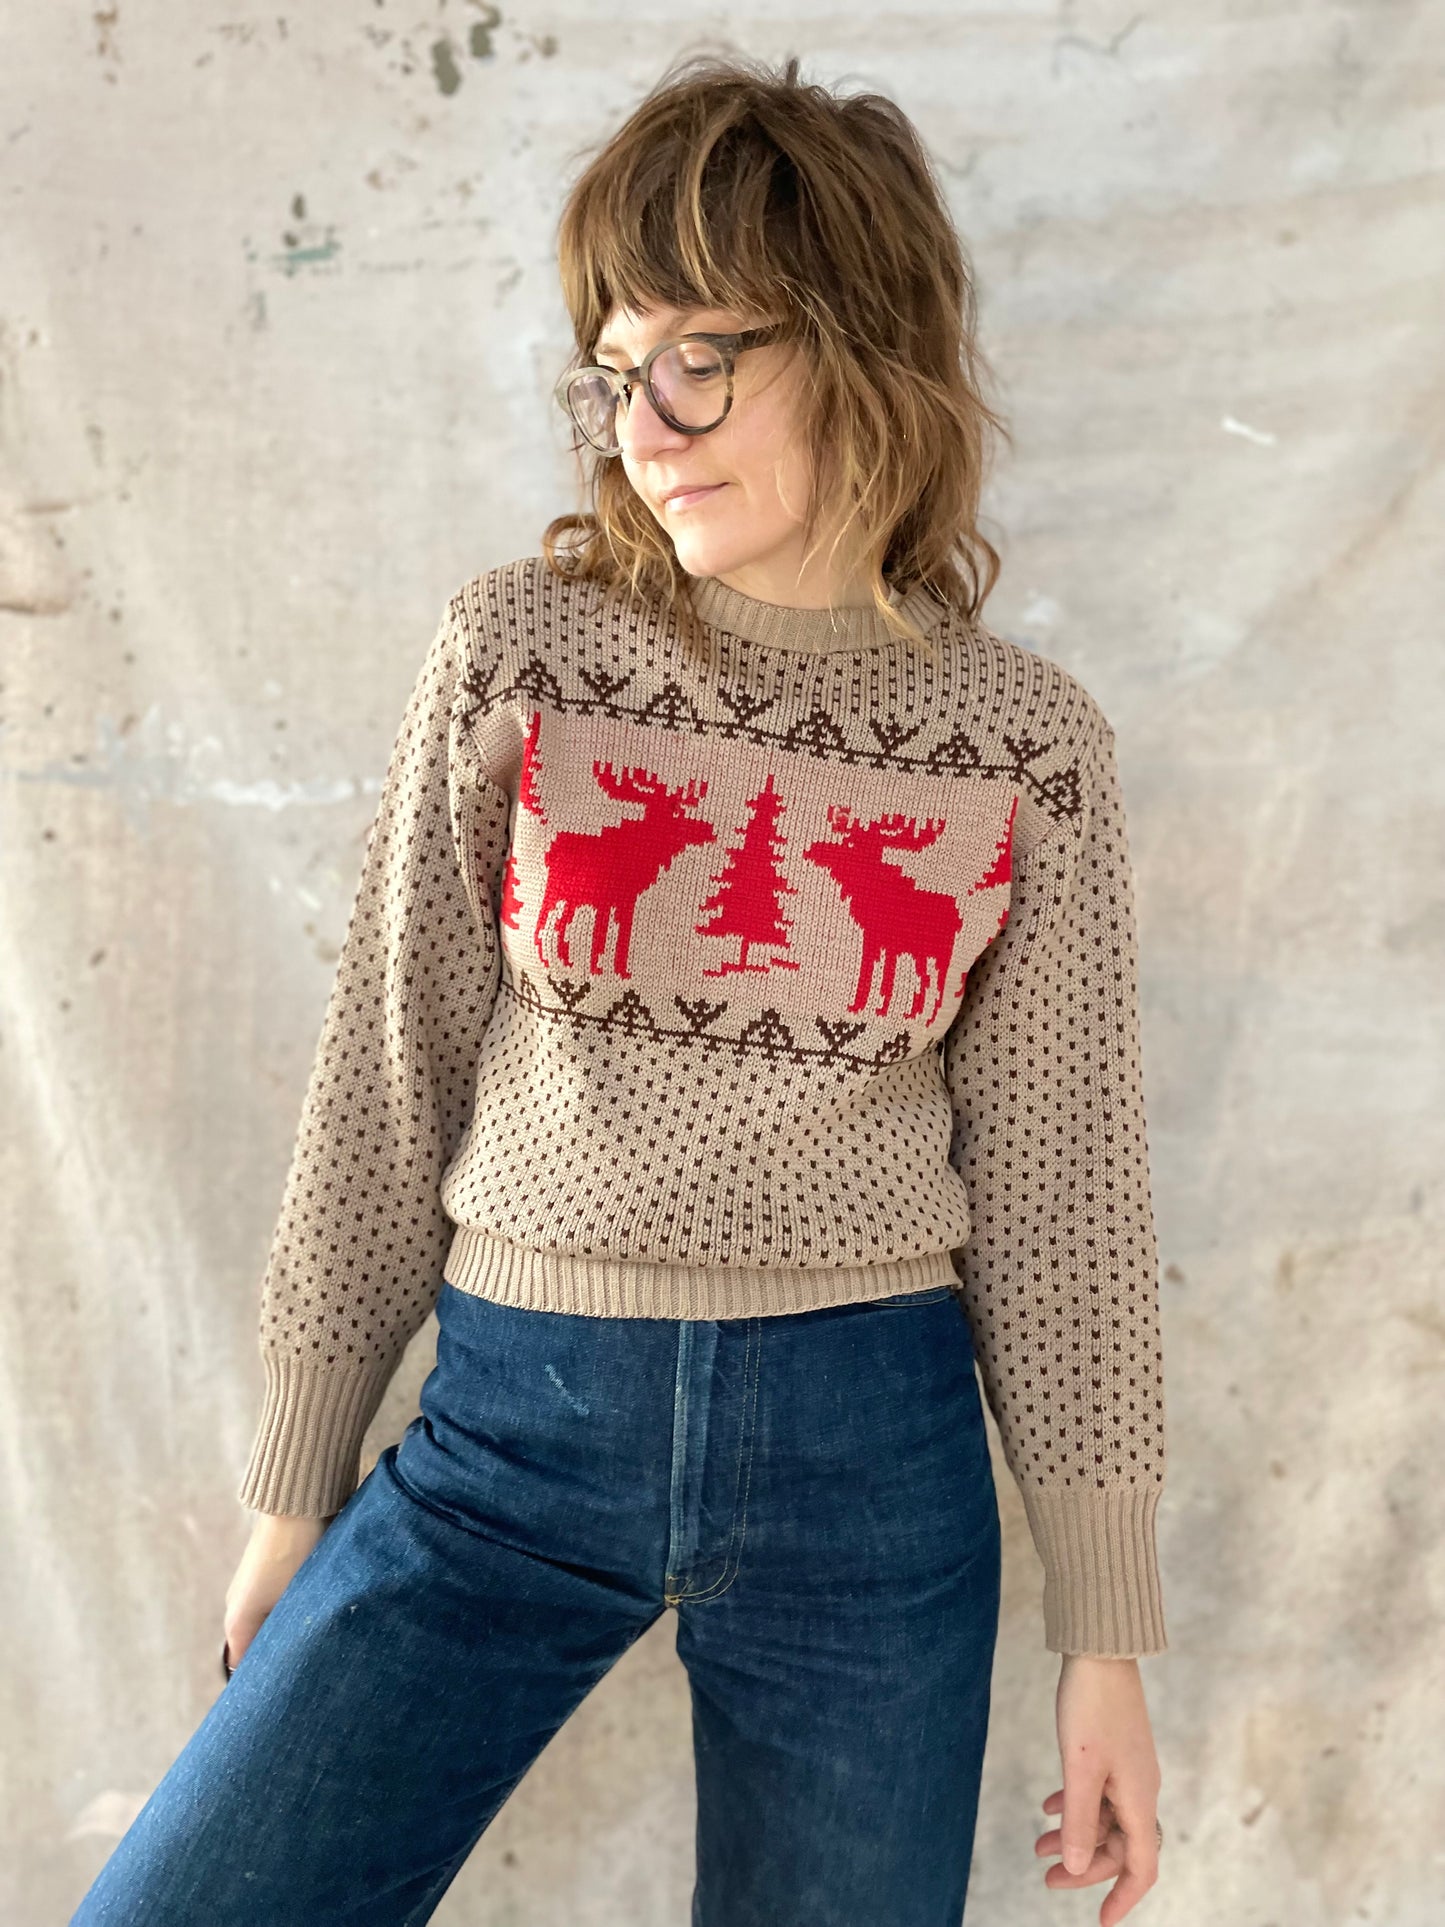 40s/50s Reindeer Holiday Sweater